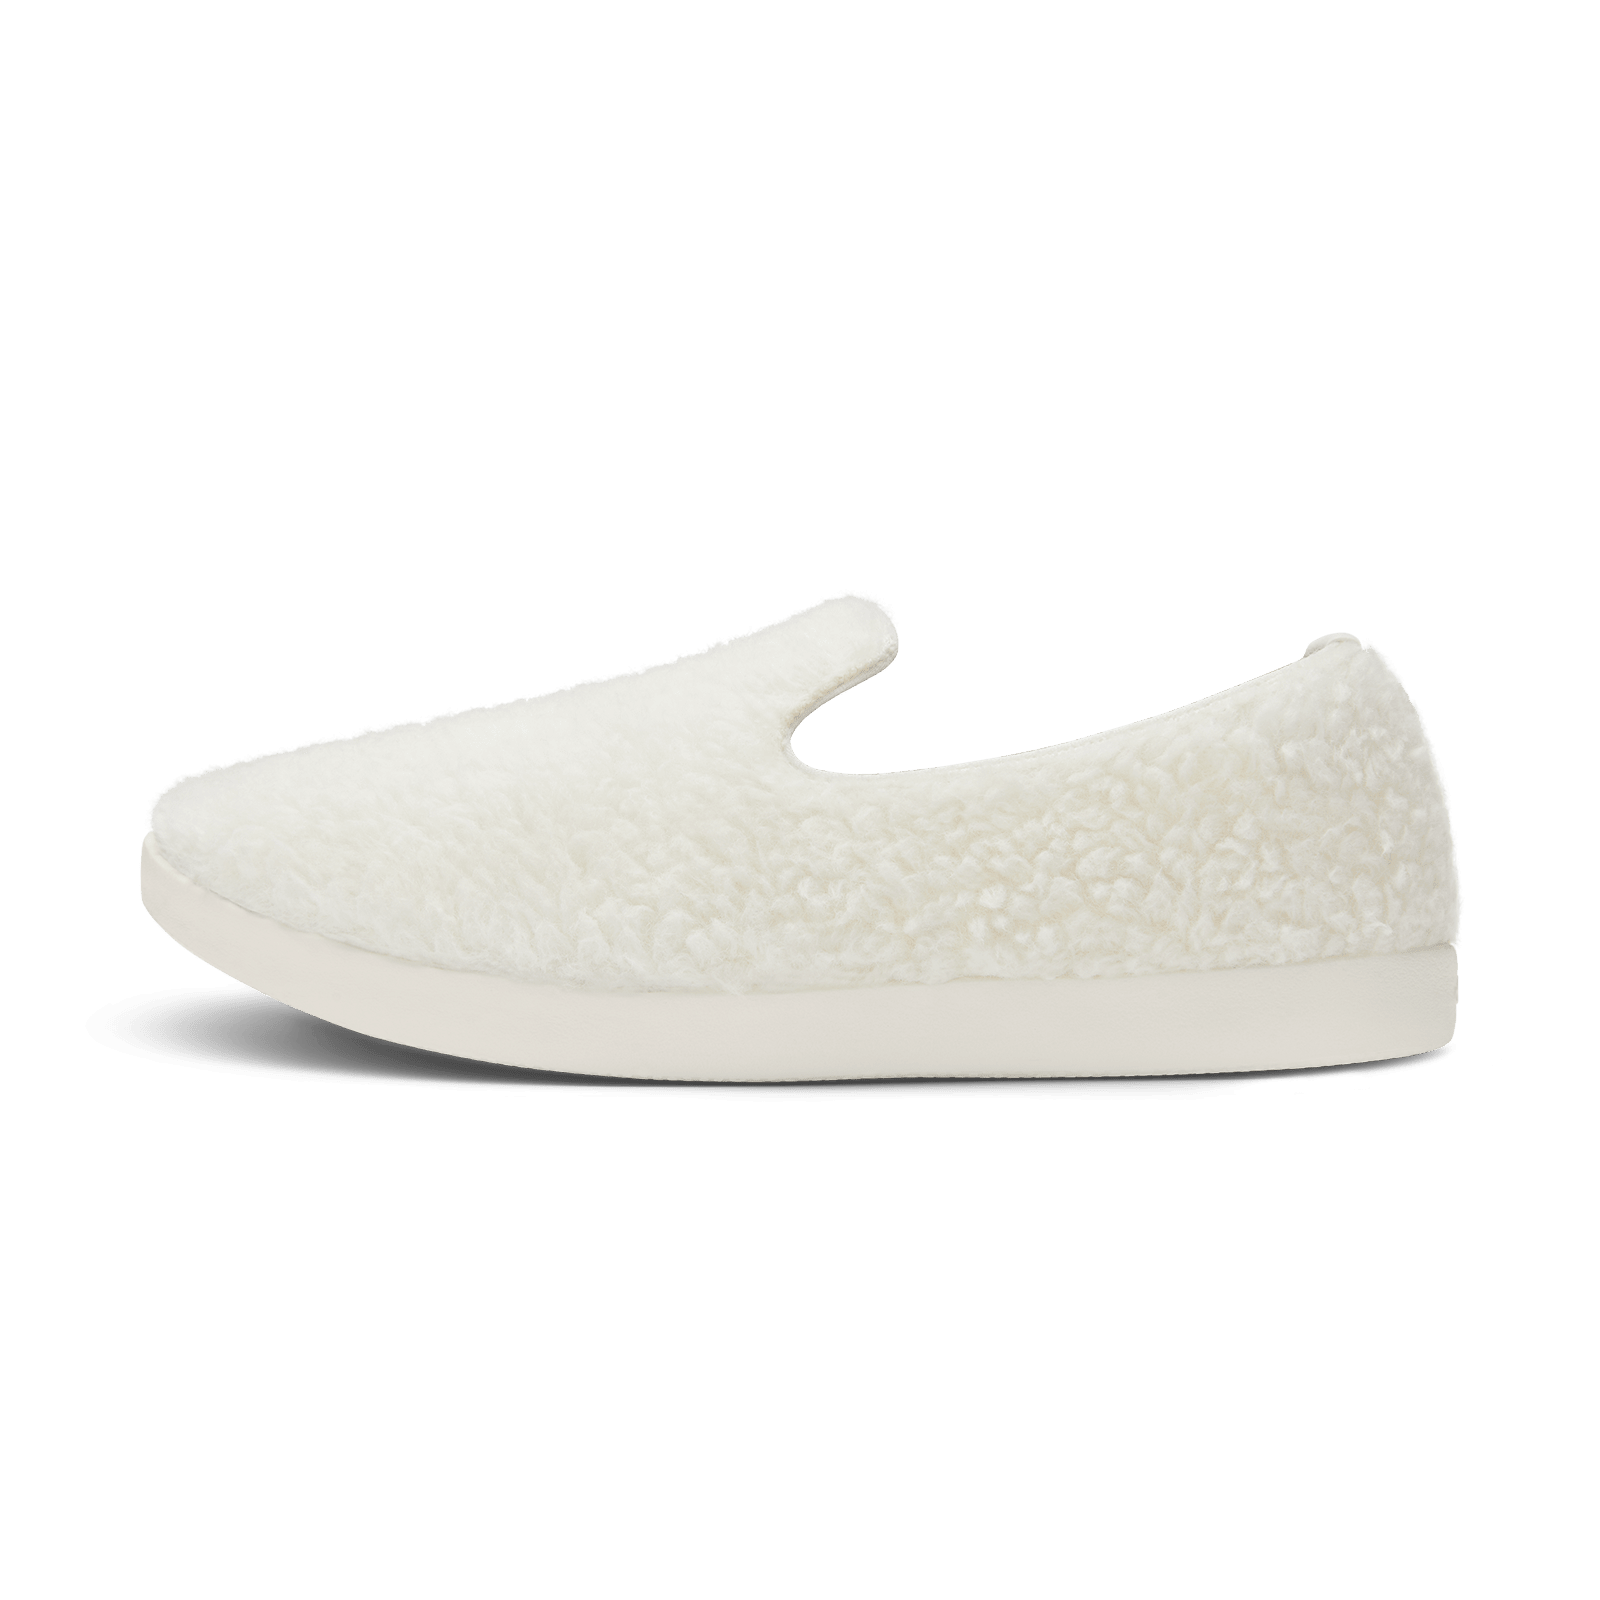 AB00A3Y SHOE LEFT GLOBAL SMALLBIRDS BIG KIDS WOOL LOUNGER FLUFF NATURAL WHITE NATURAL WHITE